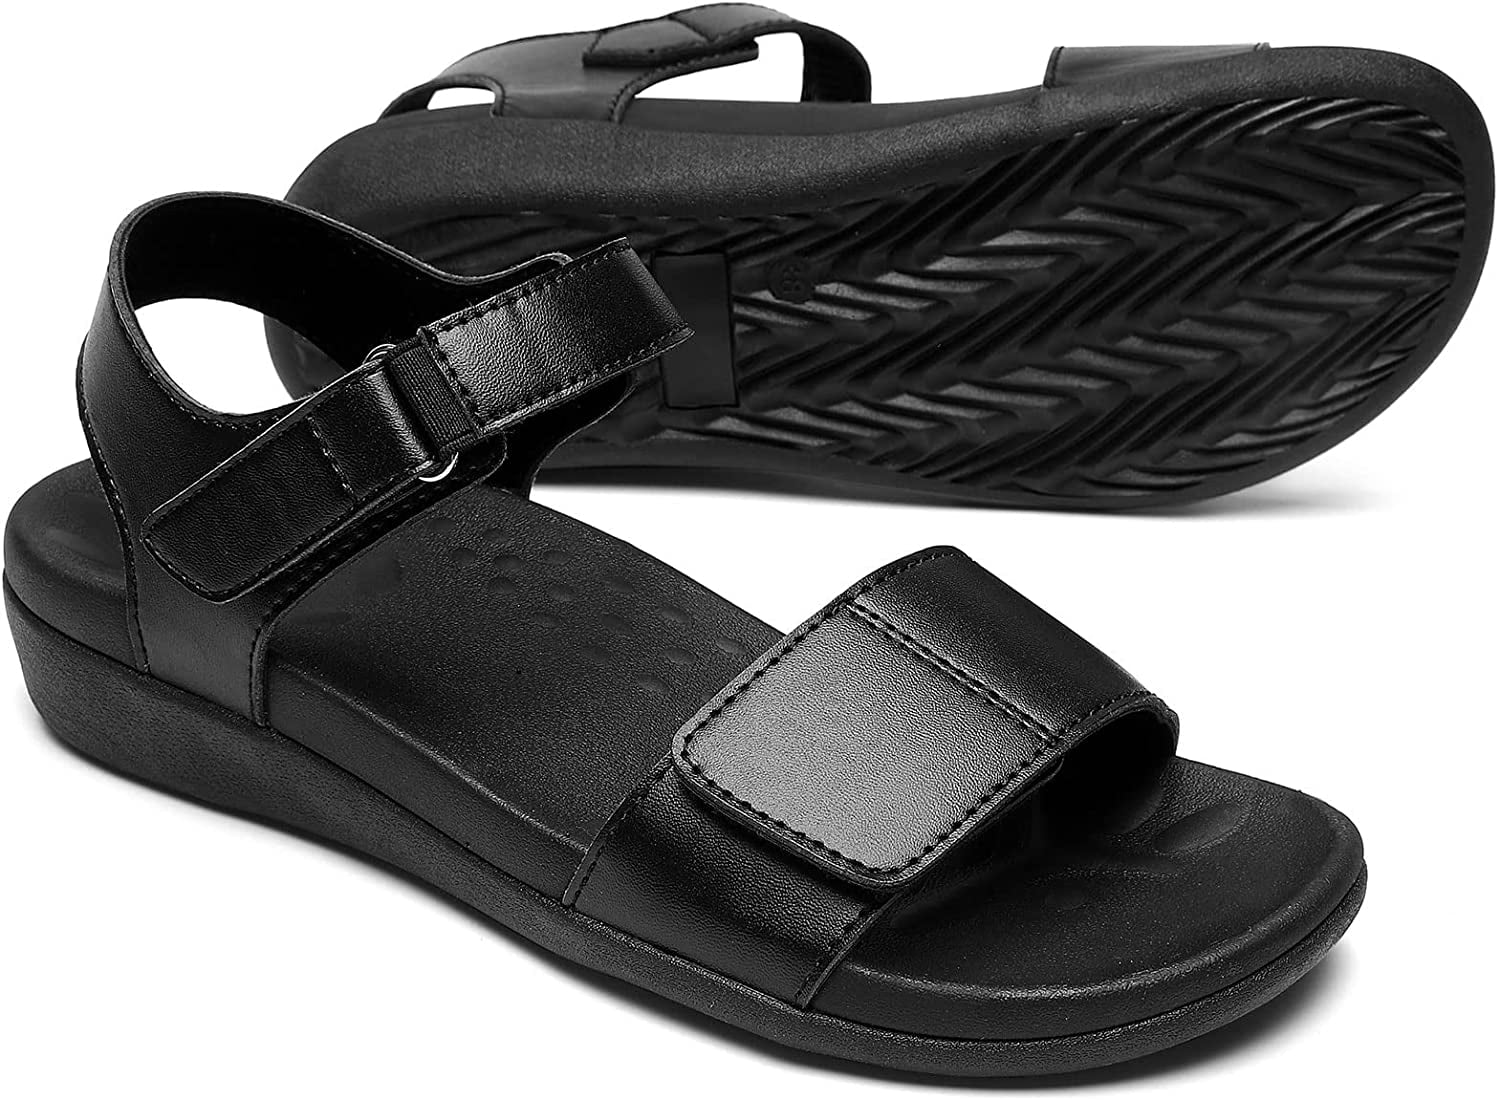 Grey Black Pro 11 Wellbeing Orthotic Sandals for Arch Support and Plantar Fasciitis 37 